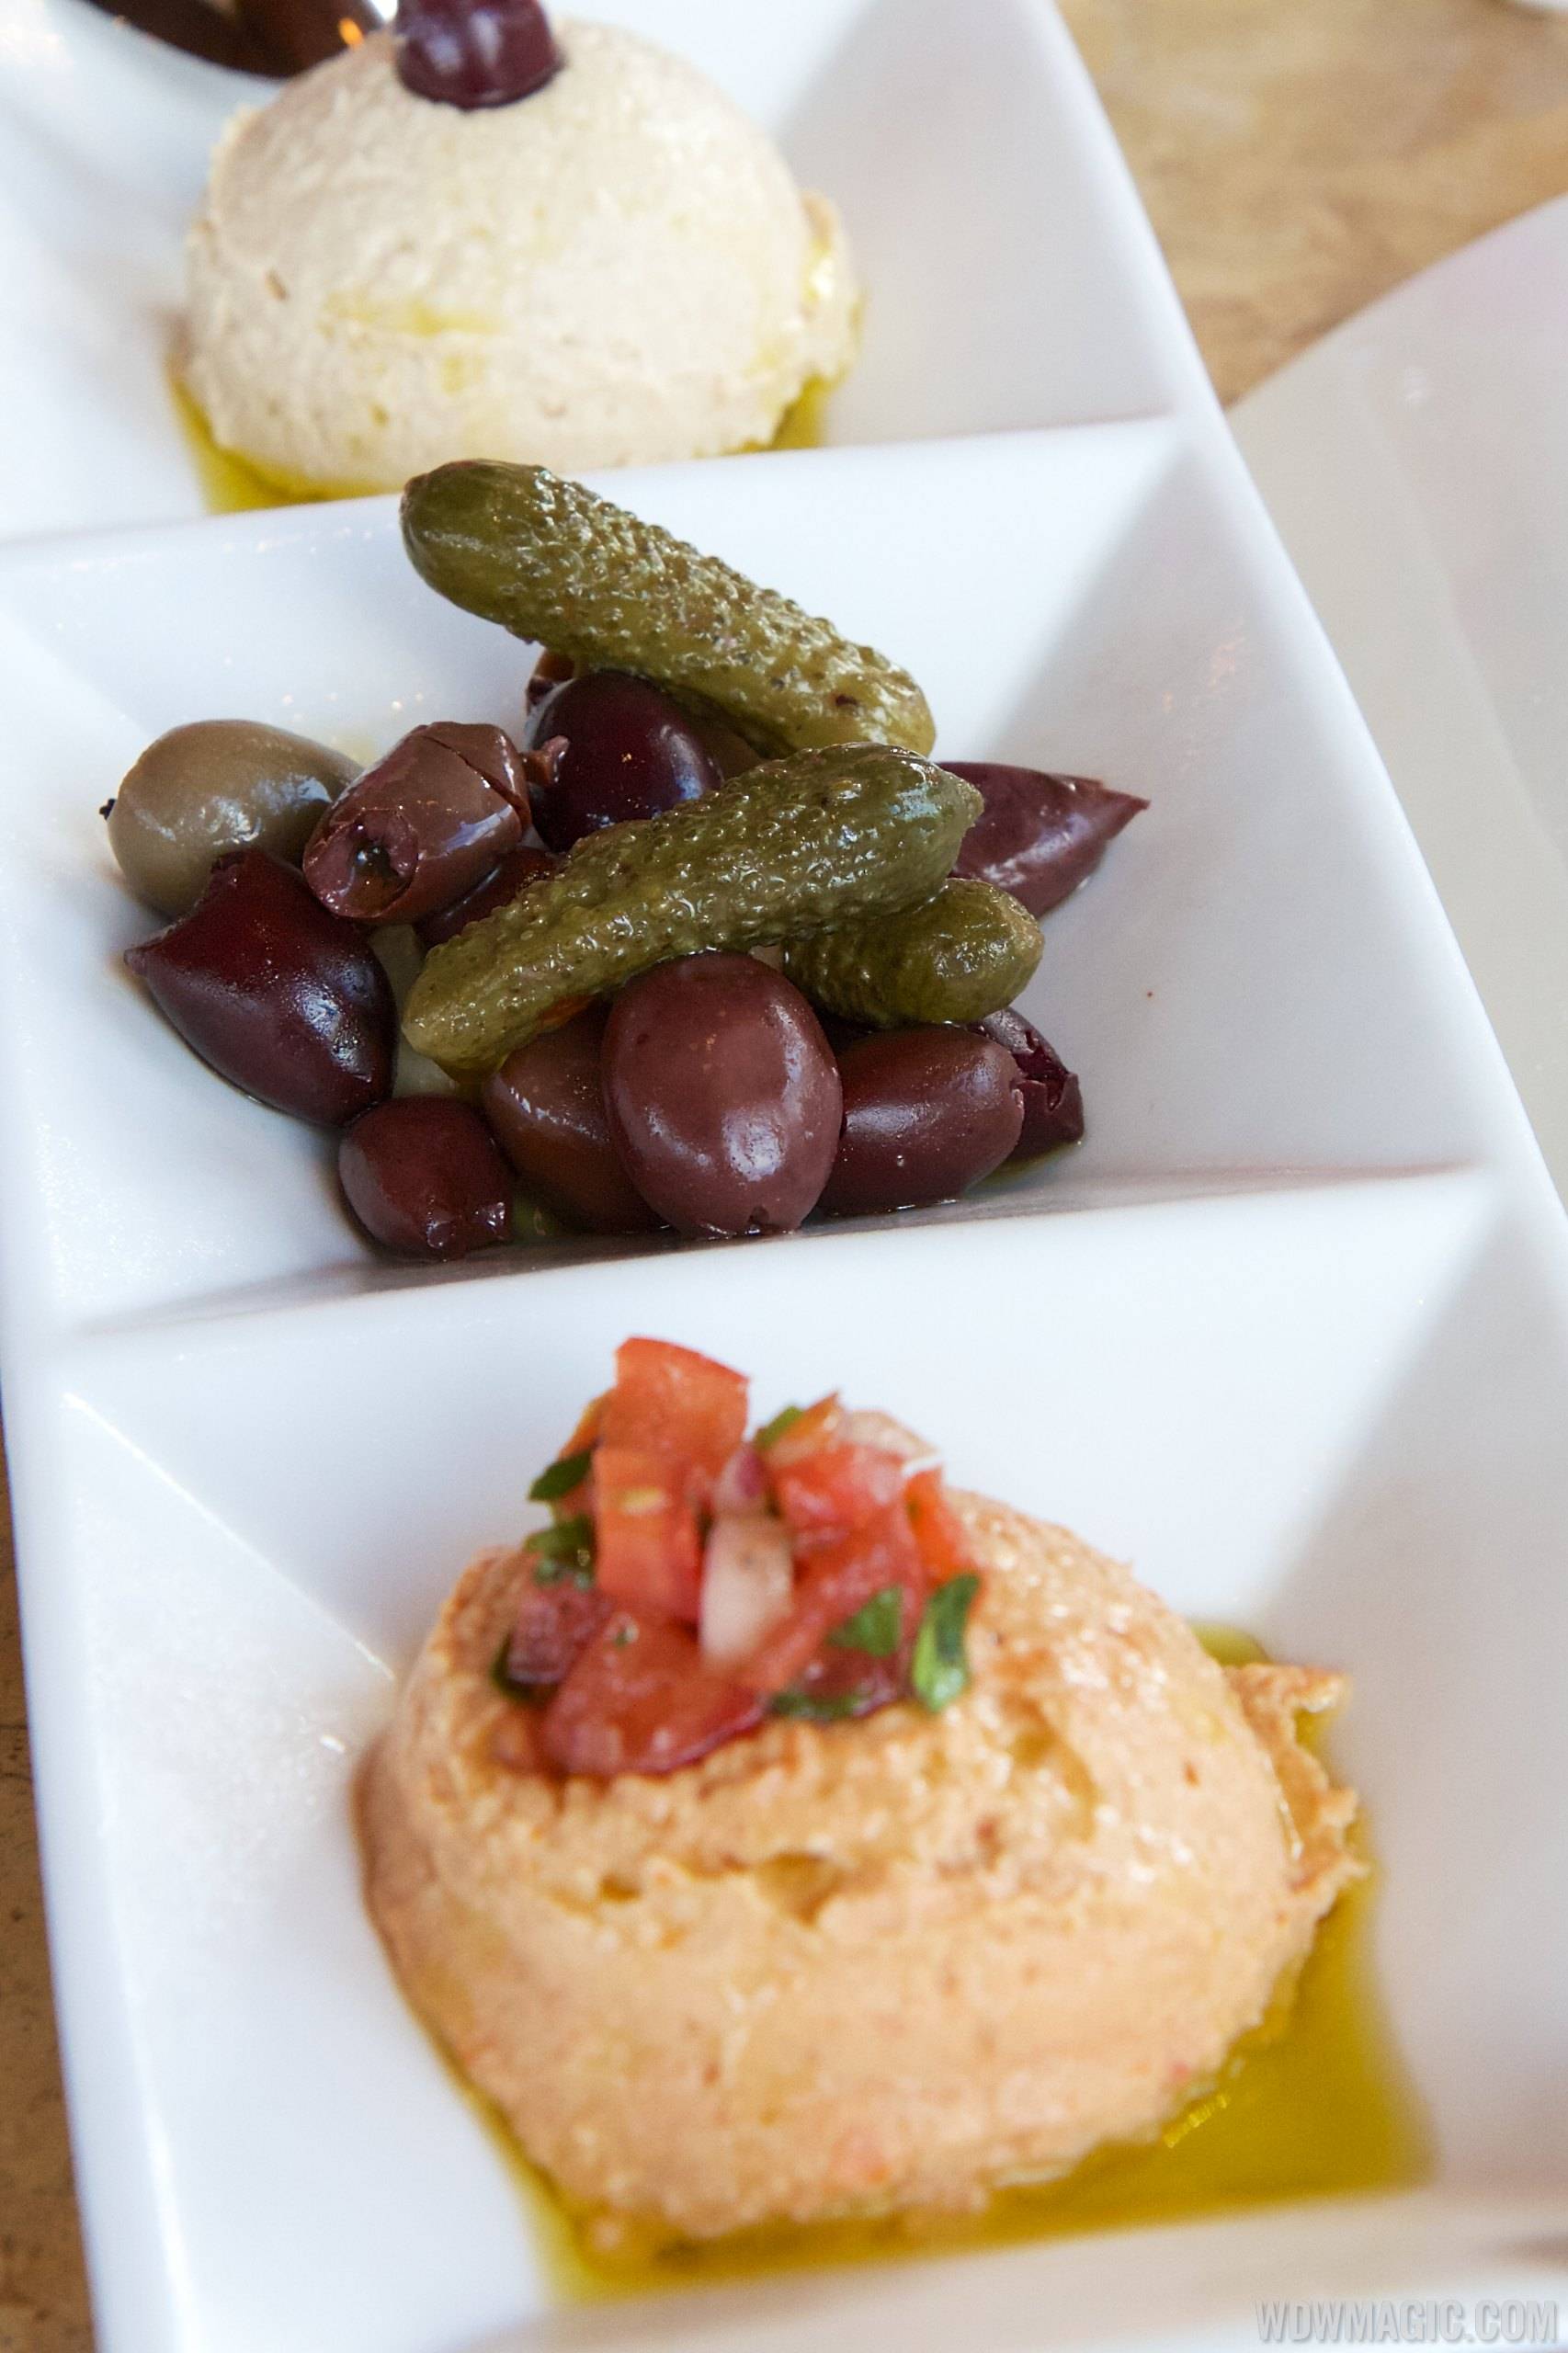 Spice Road Table - Imported Olives and Hummus $10